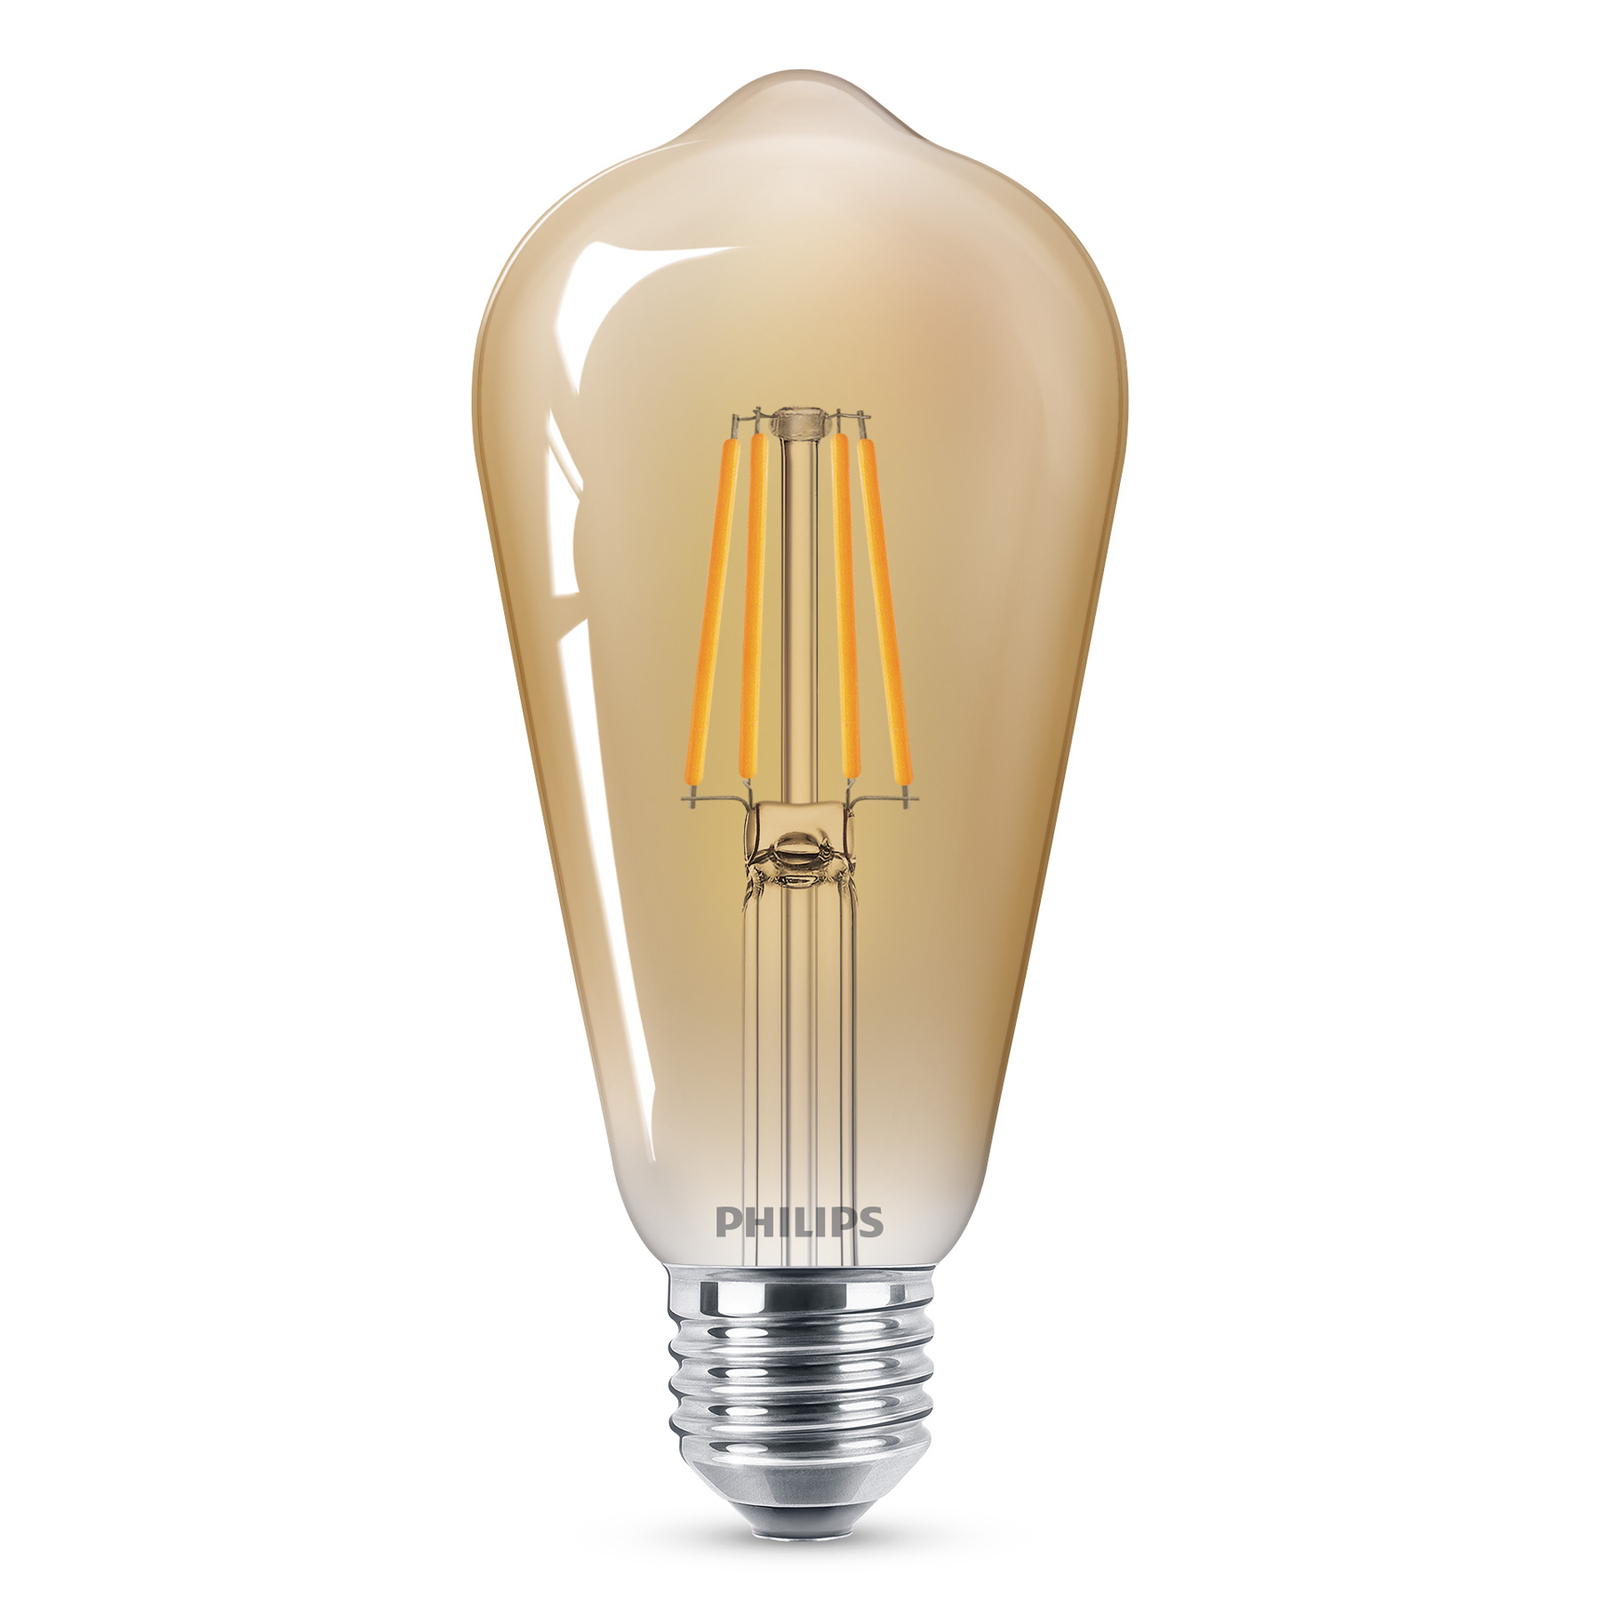 Philips E27 ST64 ampoule LED Curved 4 W 2 500 K or